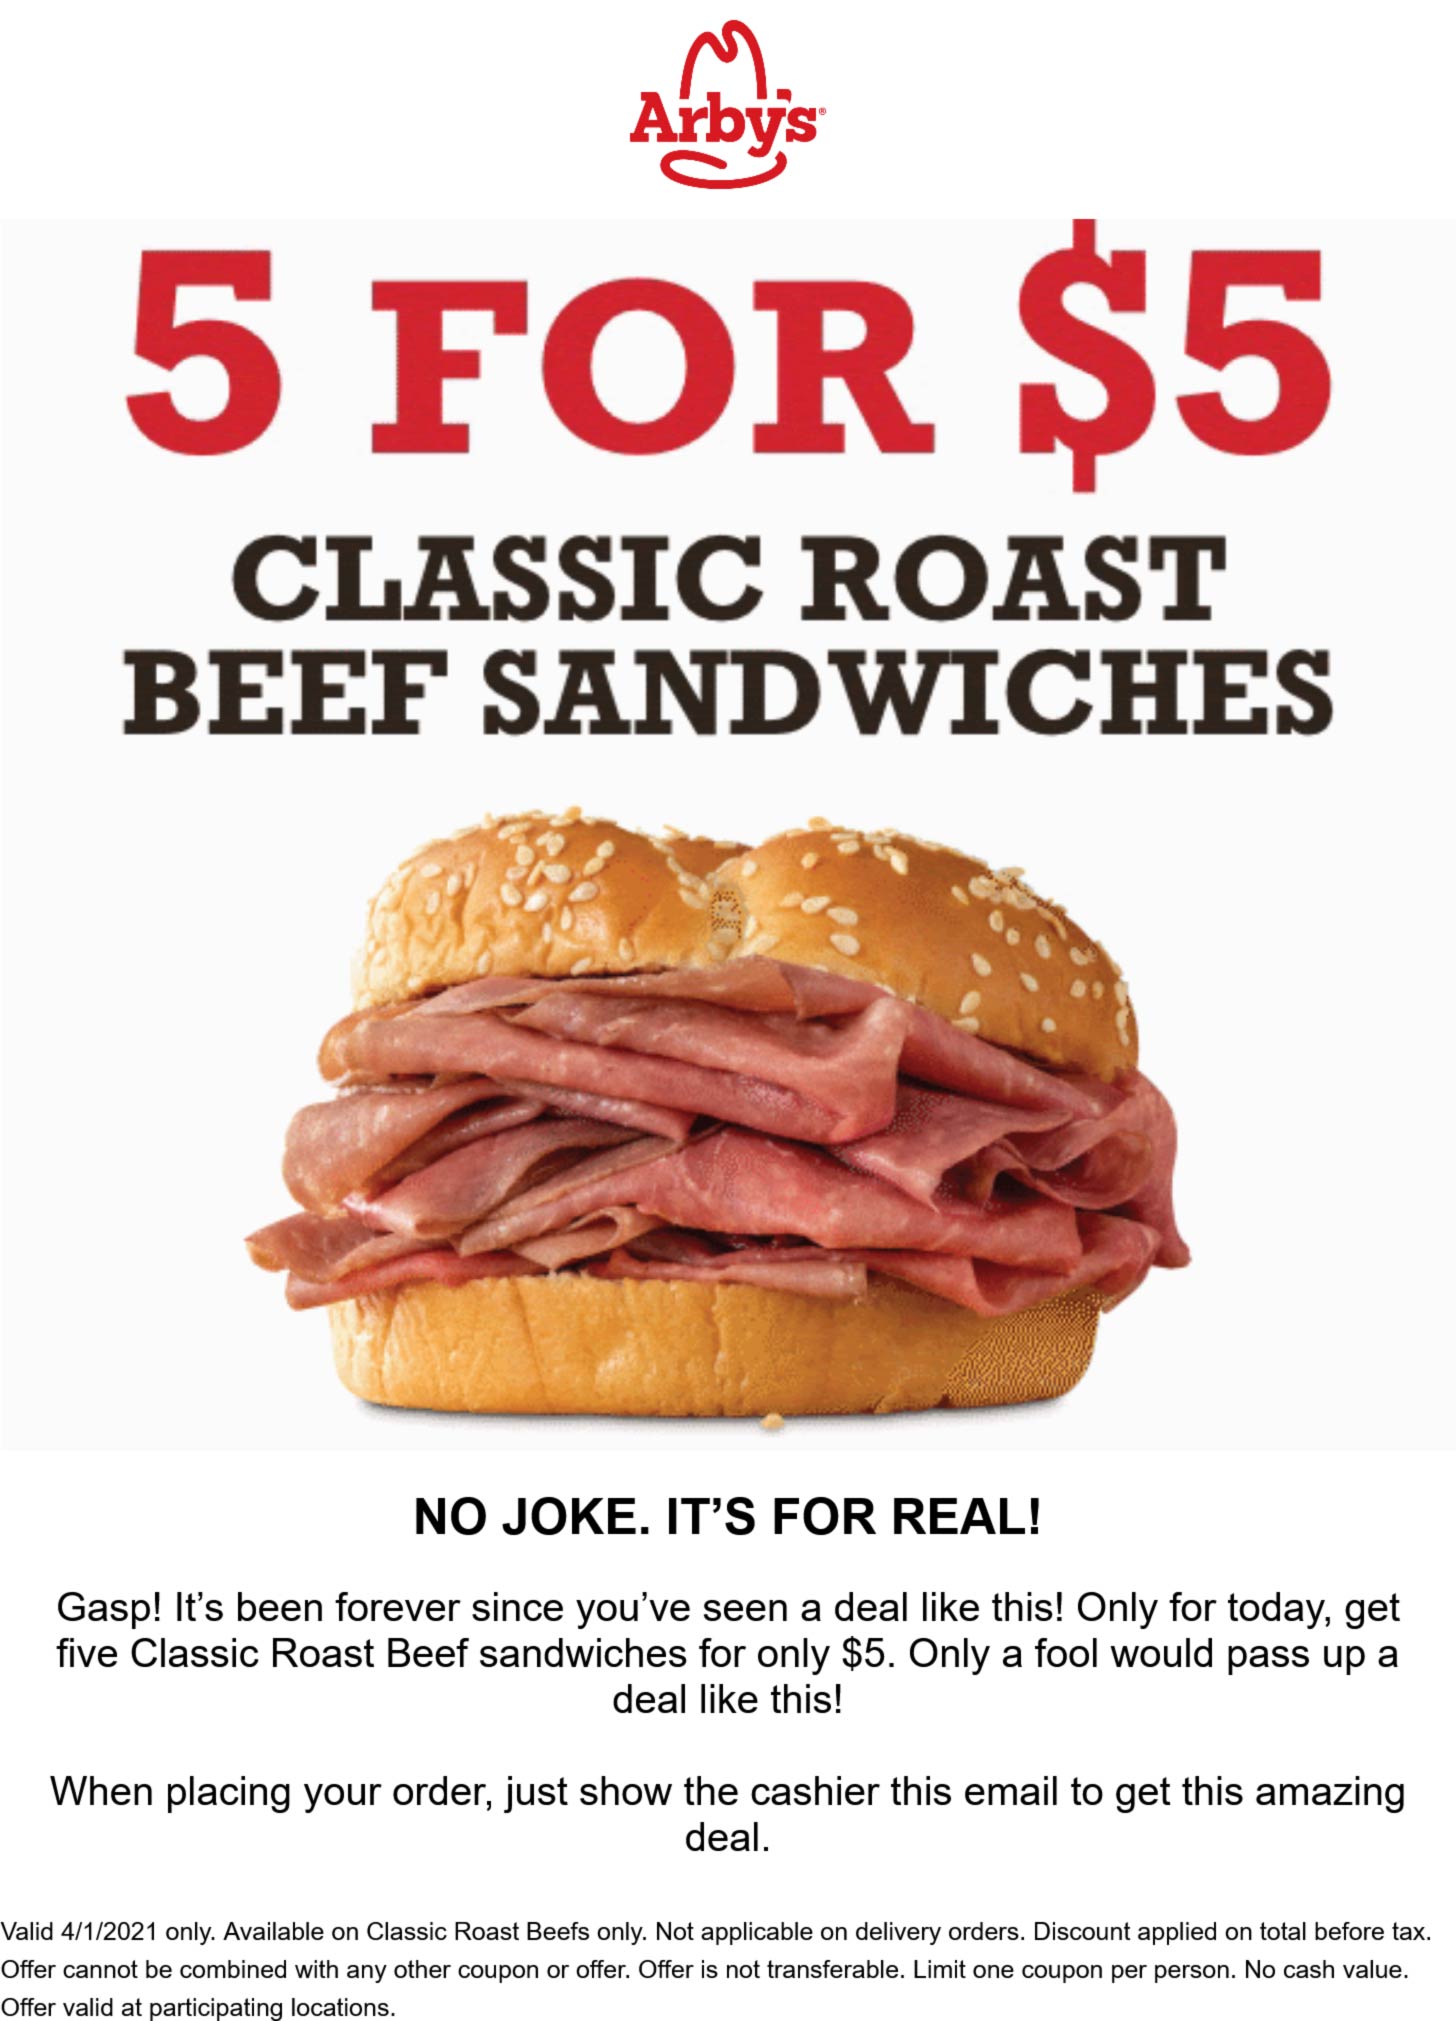 5 roast beef sandwiches for 5 today at Arbys arbys The Coupons App®